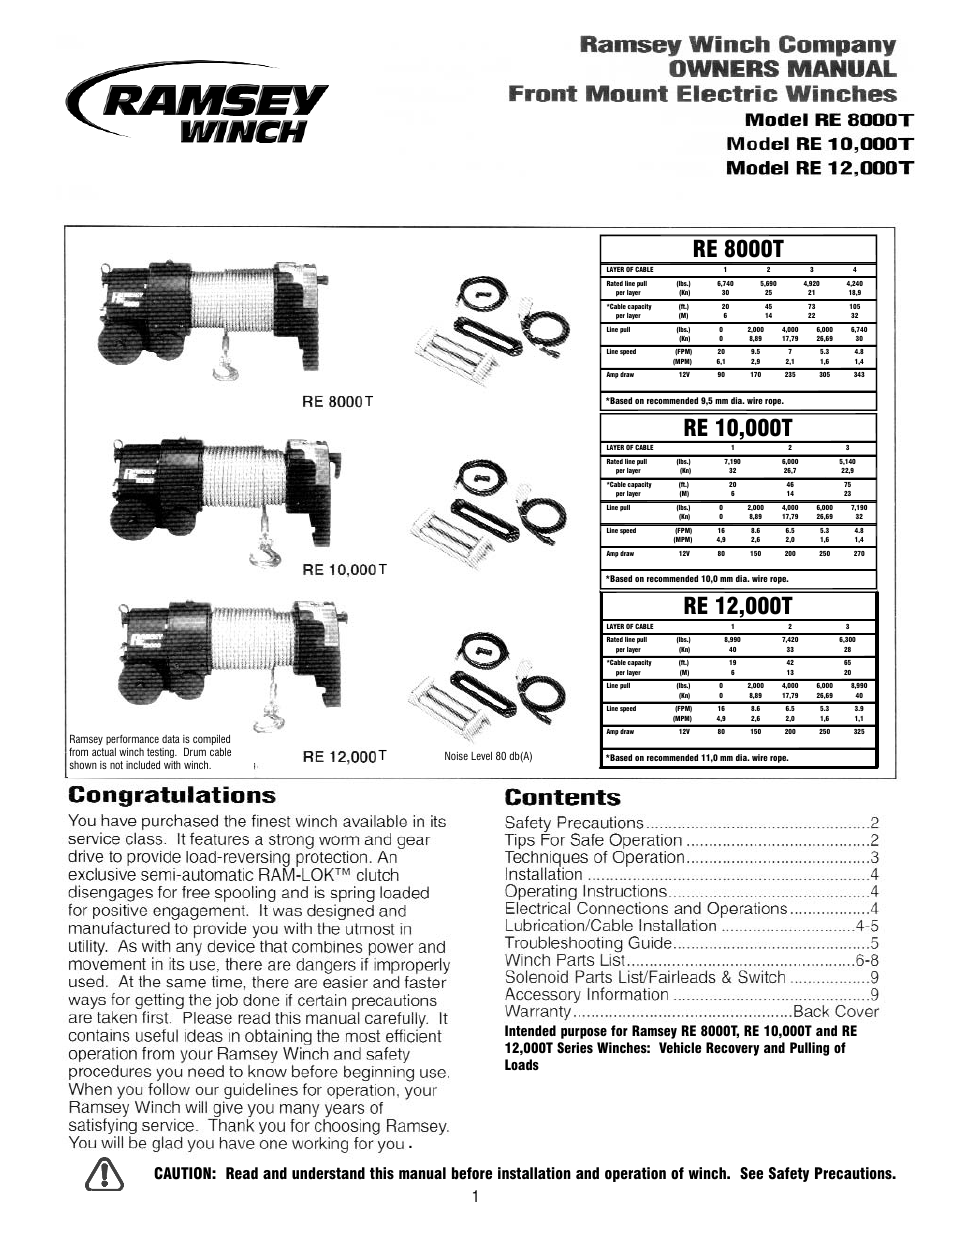 Ramsey Winch RE 8000/10000/12000T User Manual | 12 pages